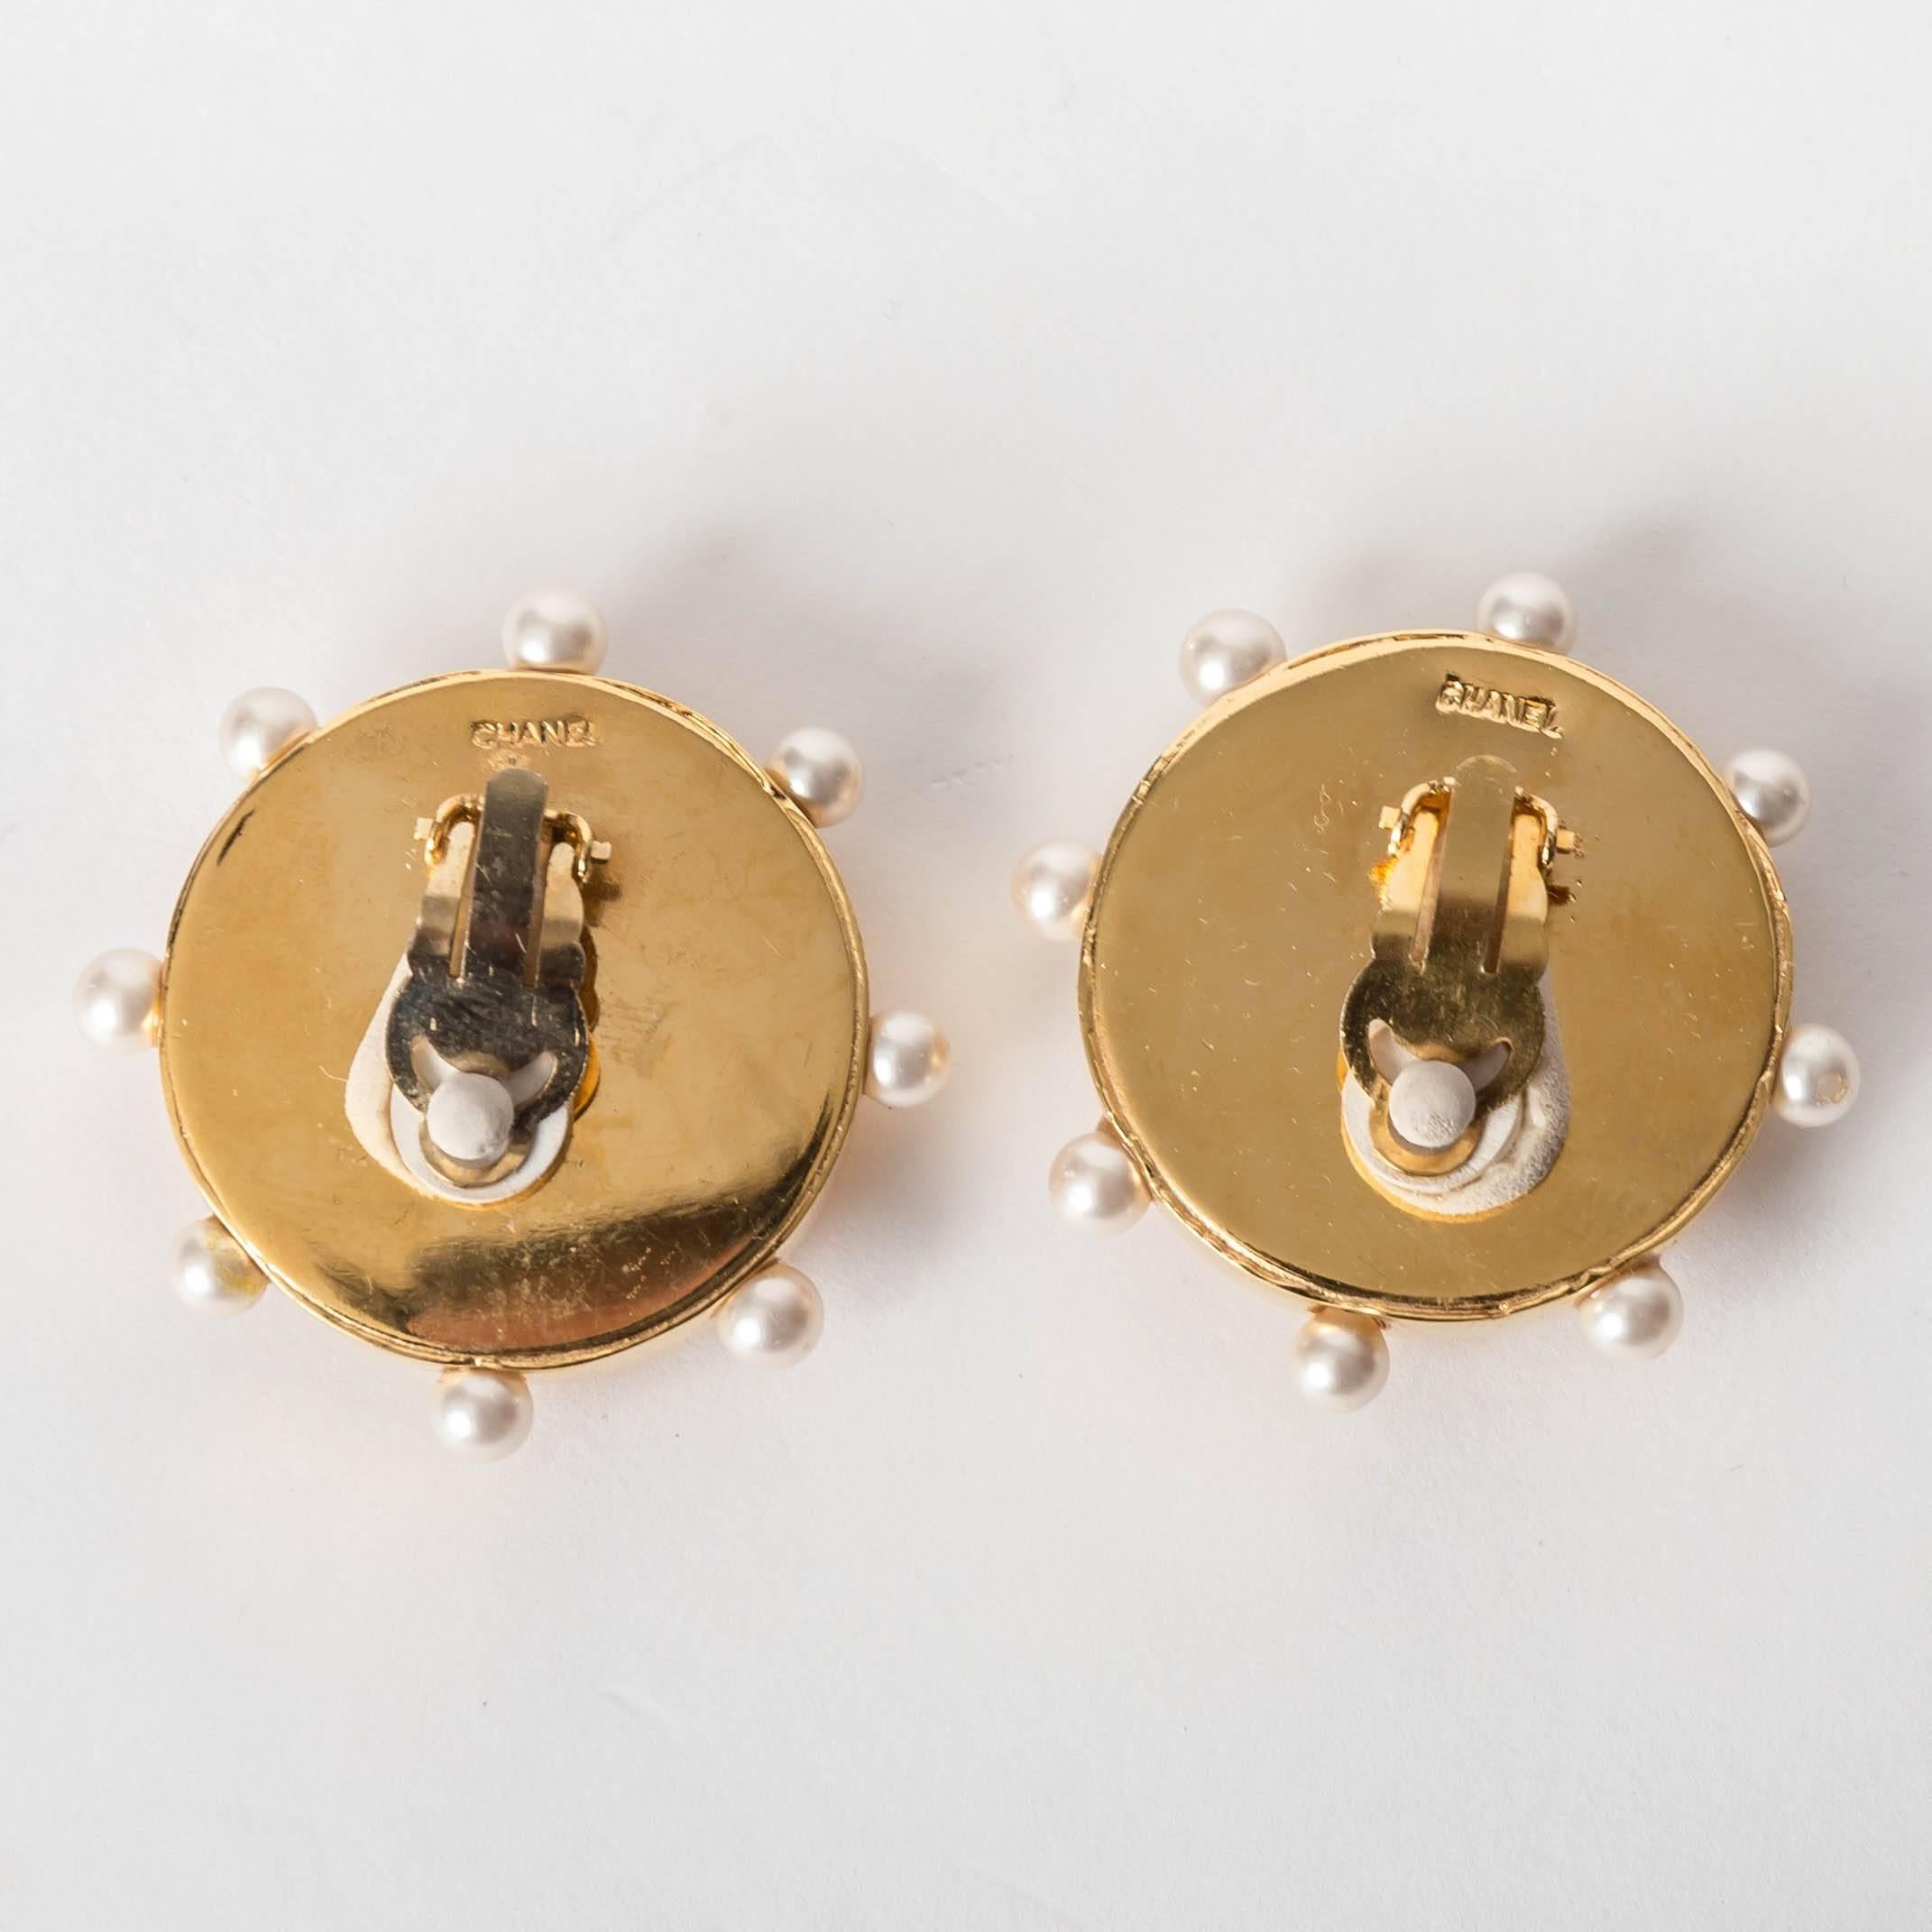 Chanel Vintage Gold Earrings with Pearl Surround 5